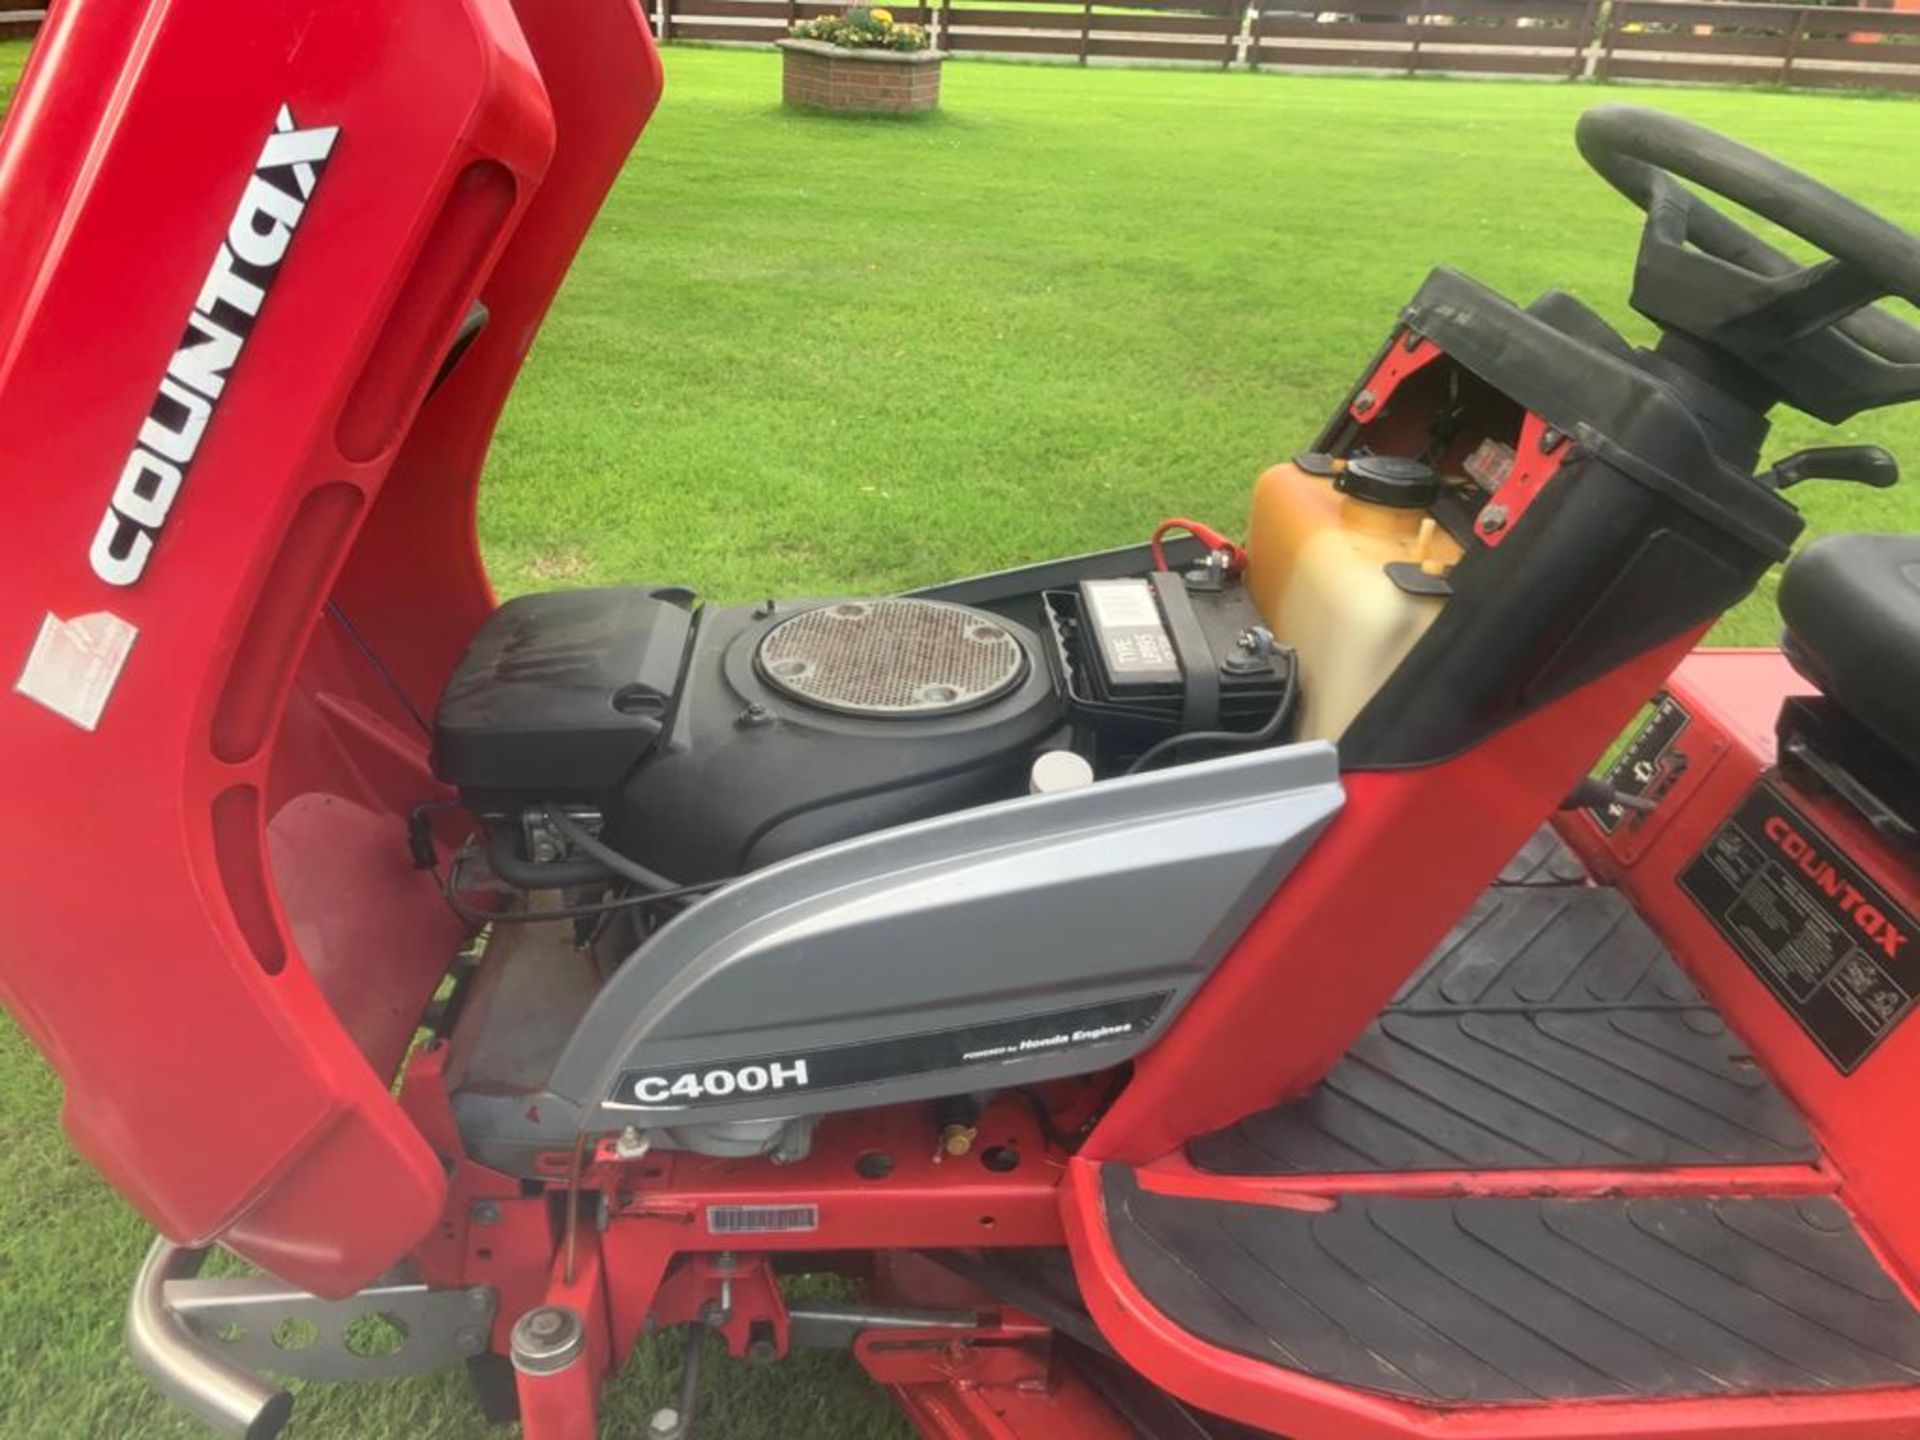 Countax C 400H Hydrostatic Ride On Mower - Image 4 of 4